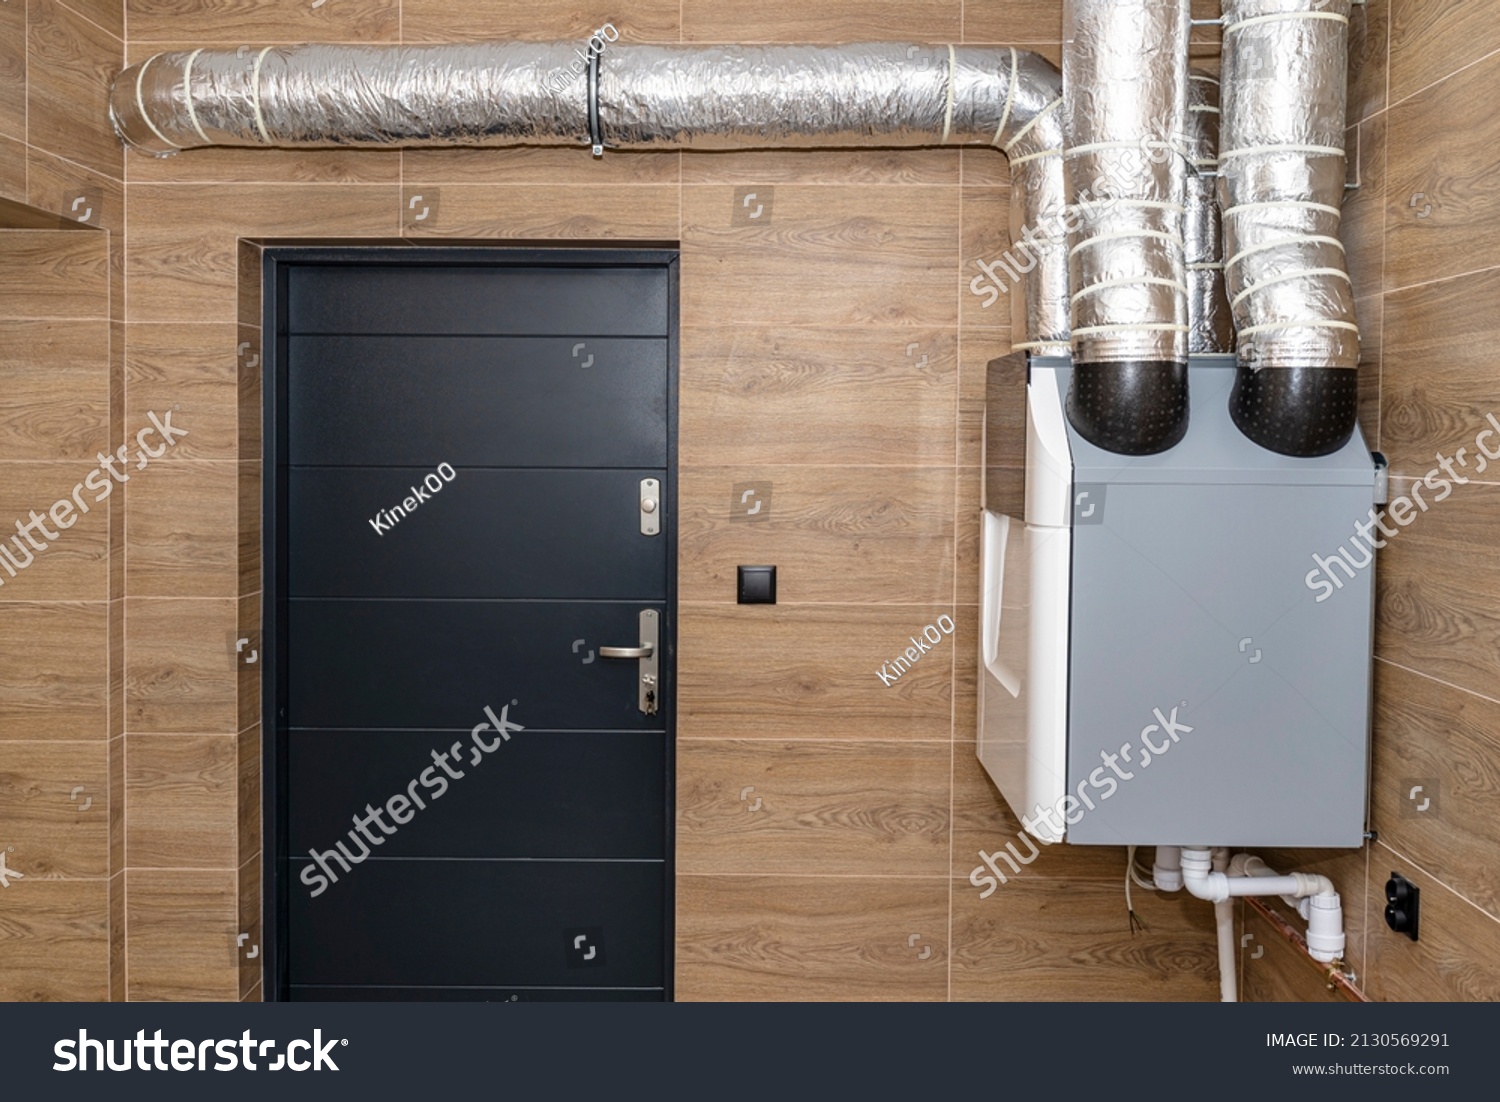 Home mechanical ventilation with heat recovery hanging on the wall in a modern gas boiler room with brown ceramic tiles imitating wood. #2130569291